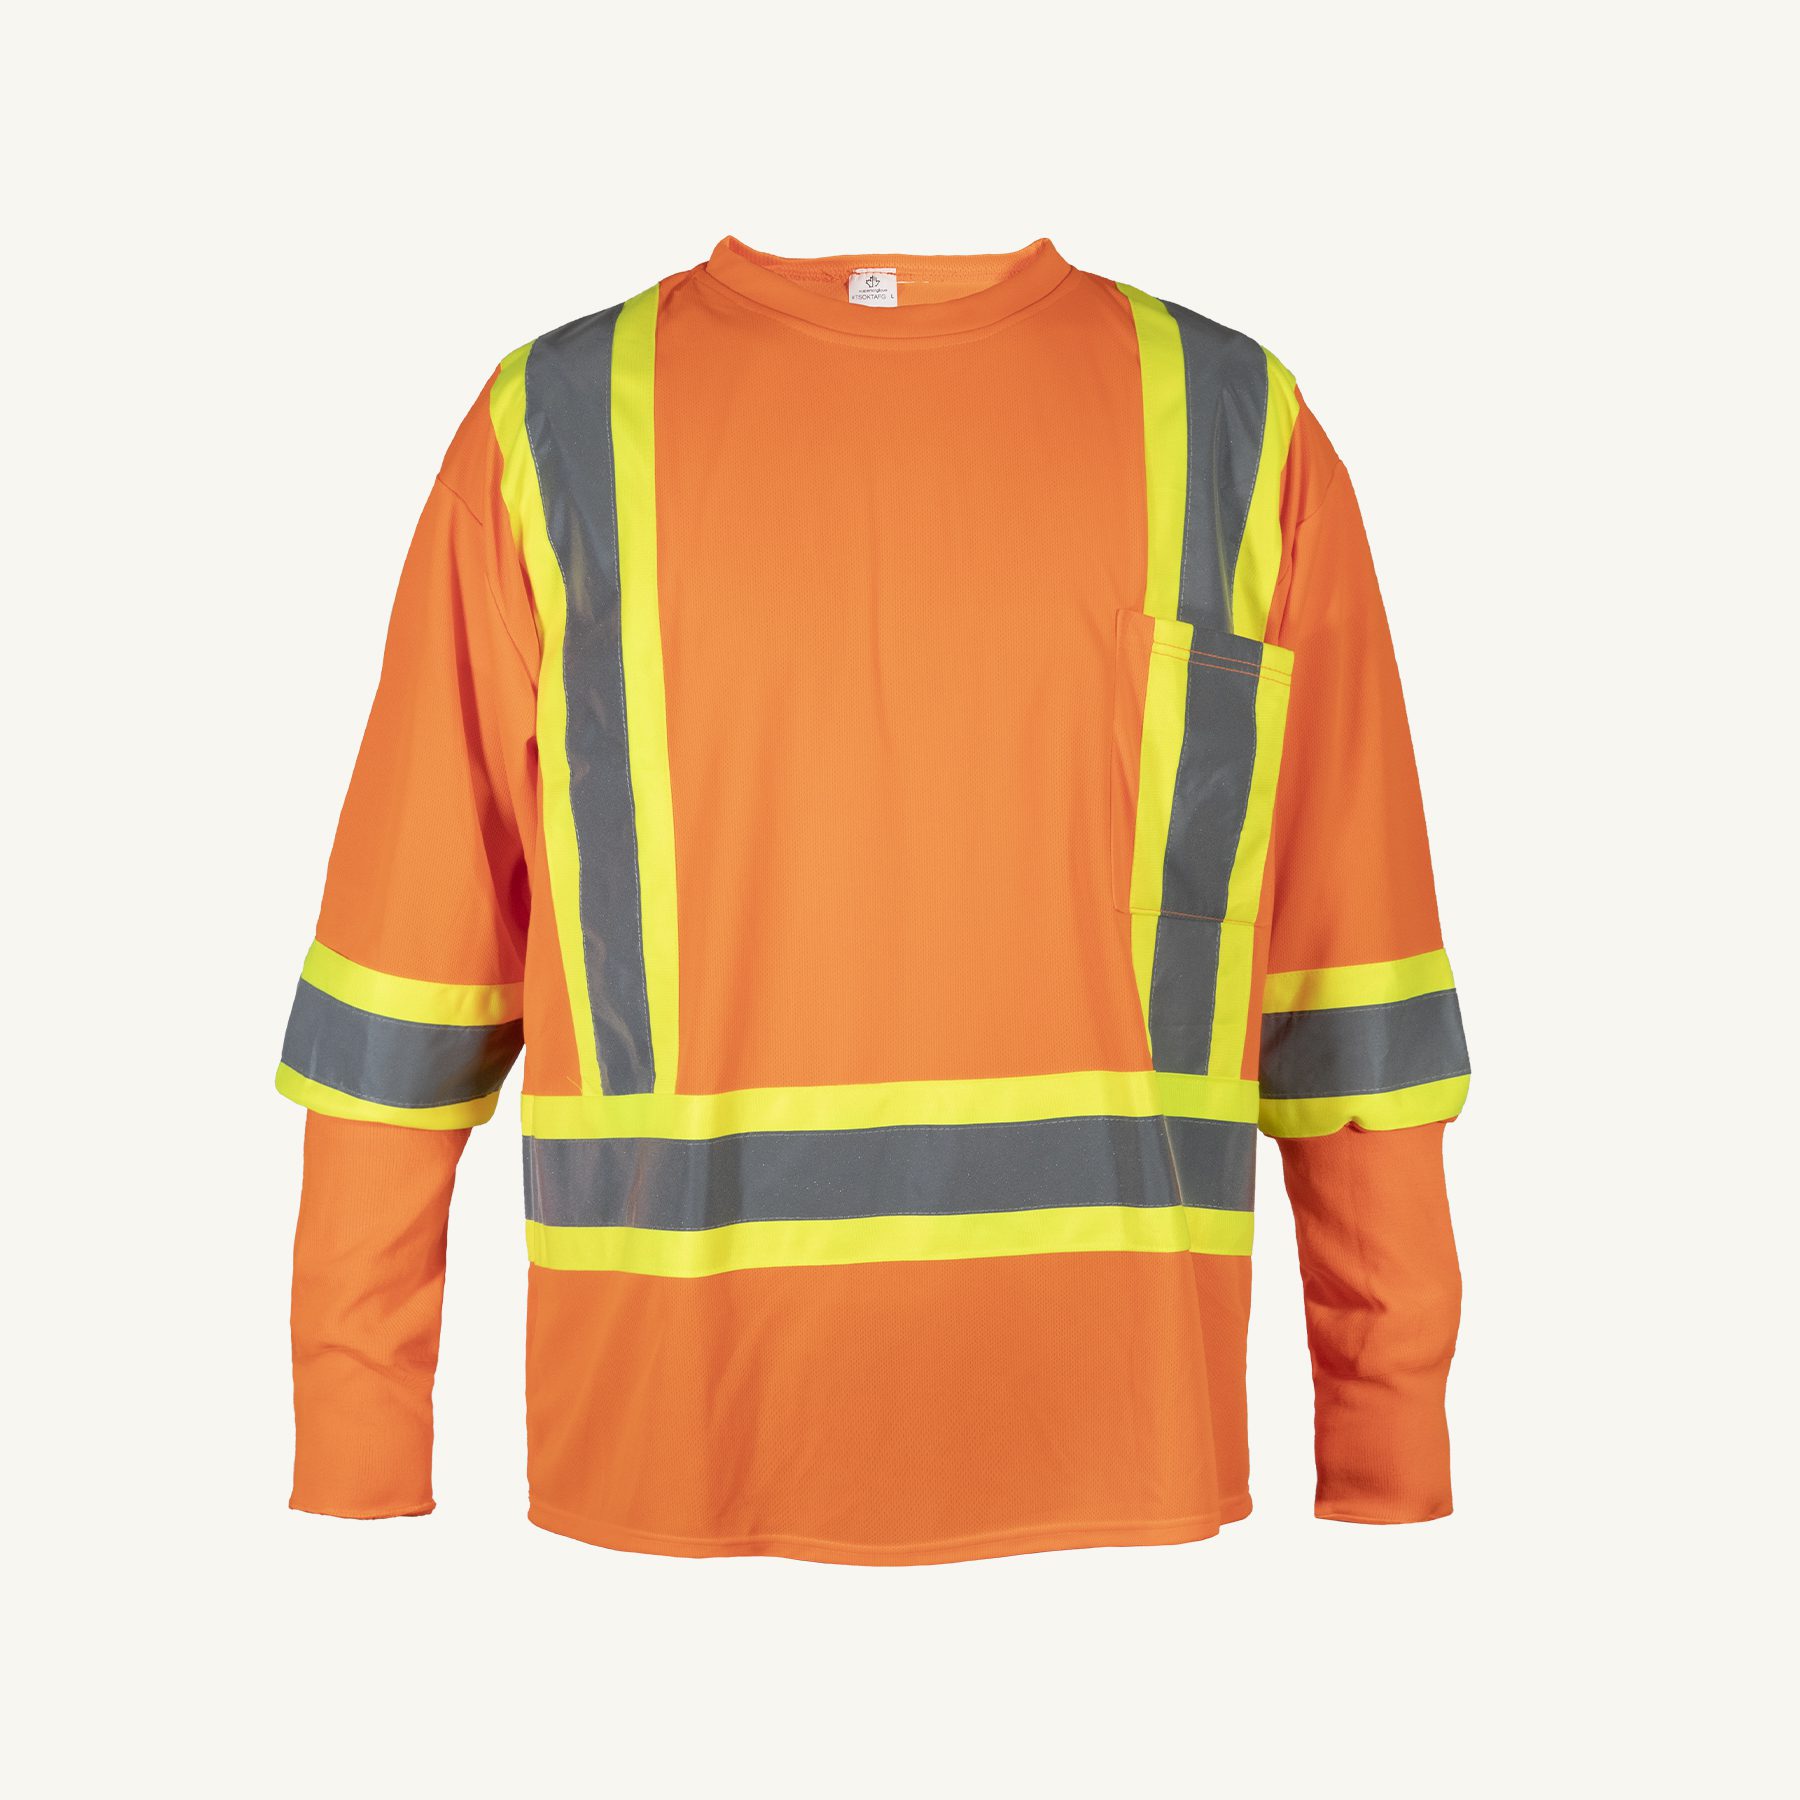 How To Safely Remove Contaminated PPE Clothing - PK Safety Supply